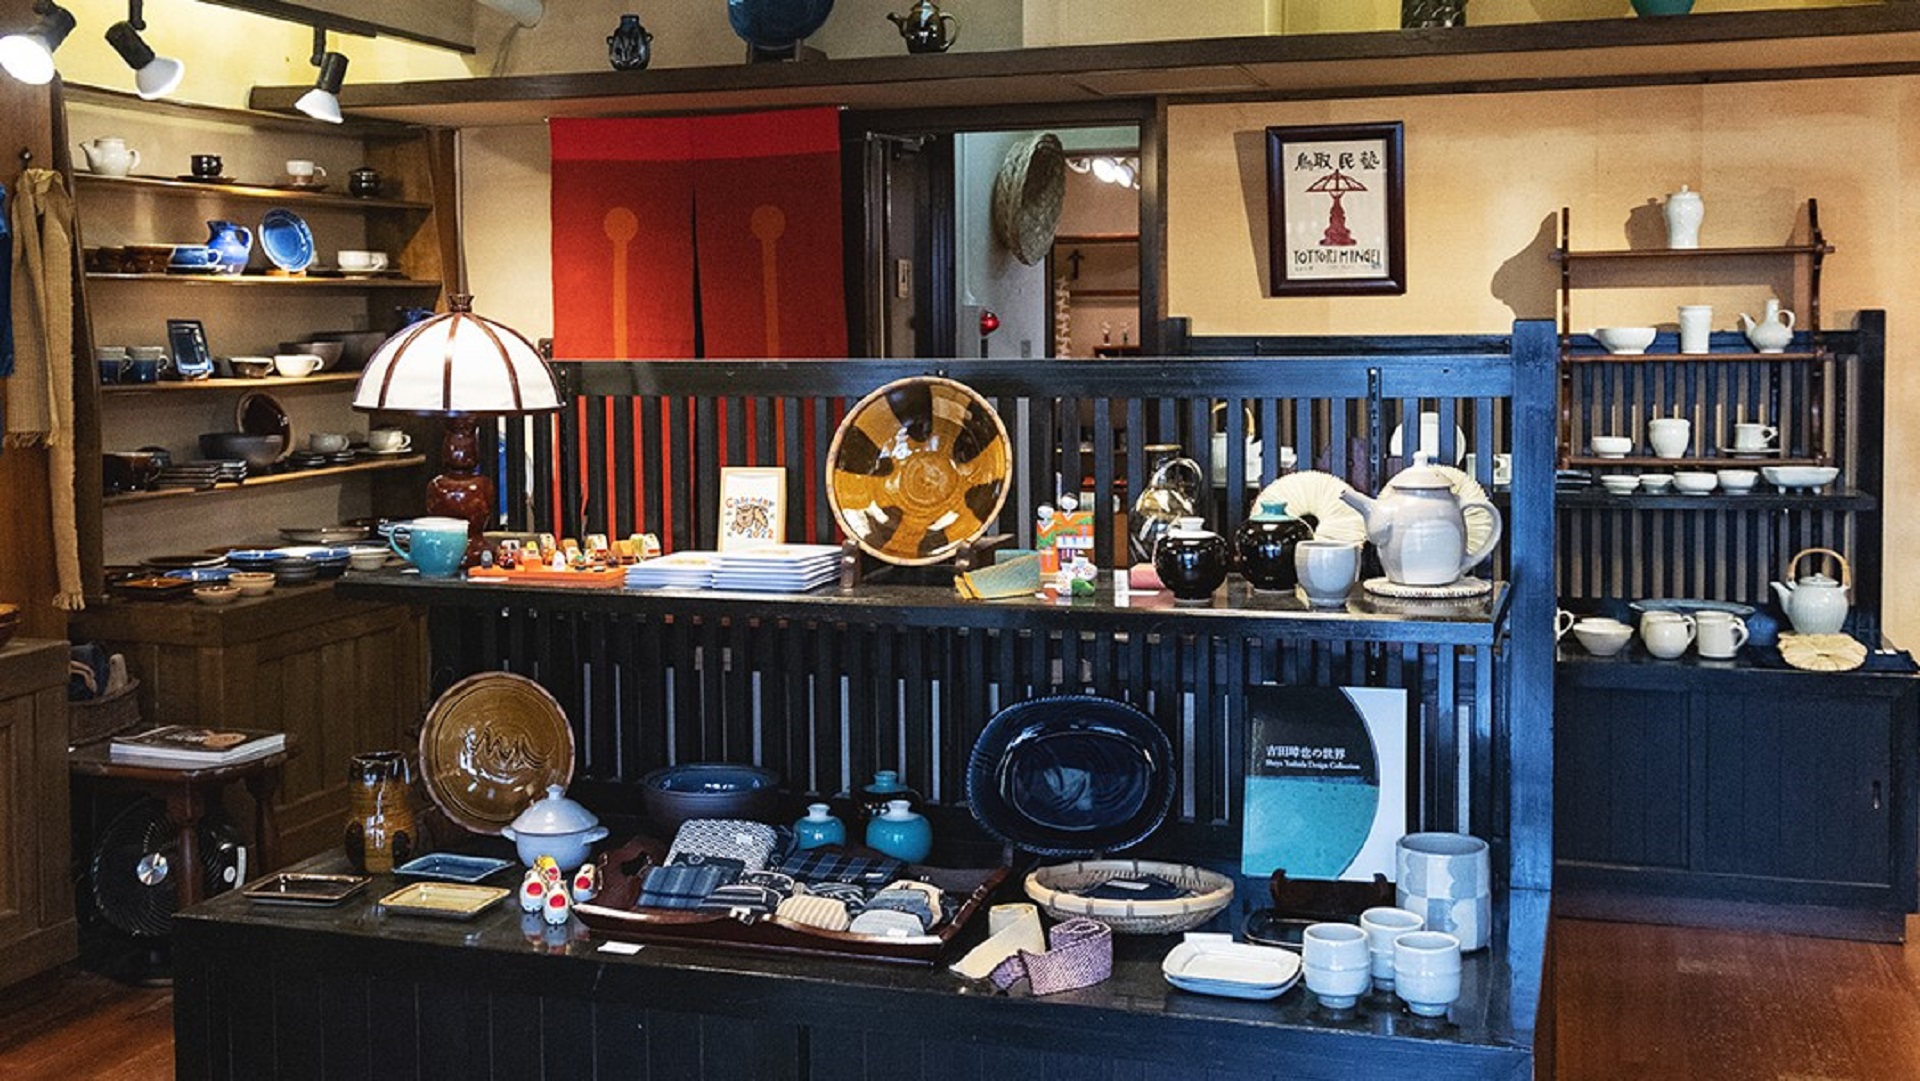 Discover Tottori’s Folk Crafts and Culture[Eastern Tottori Half-day Edition]